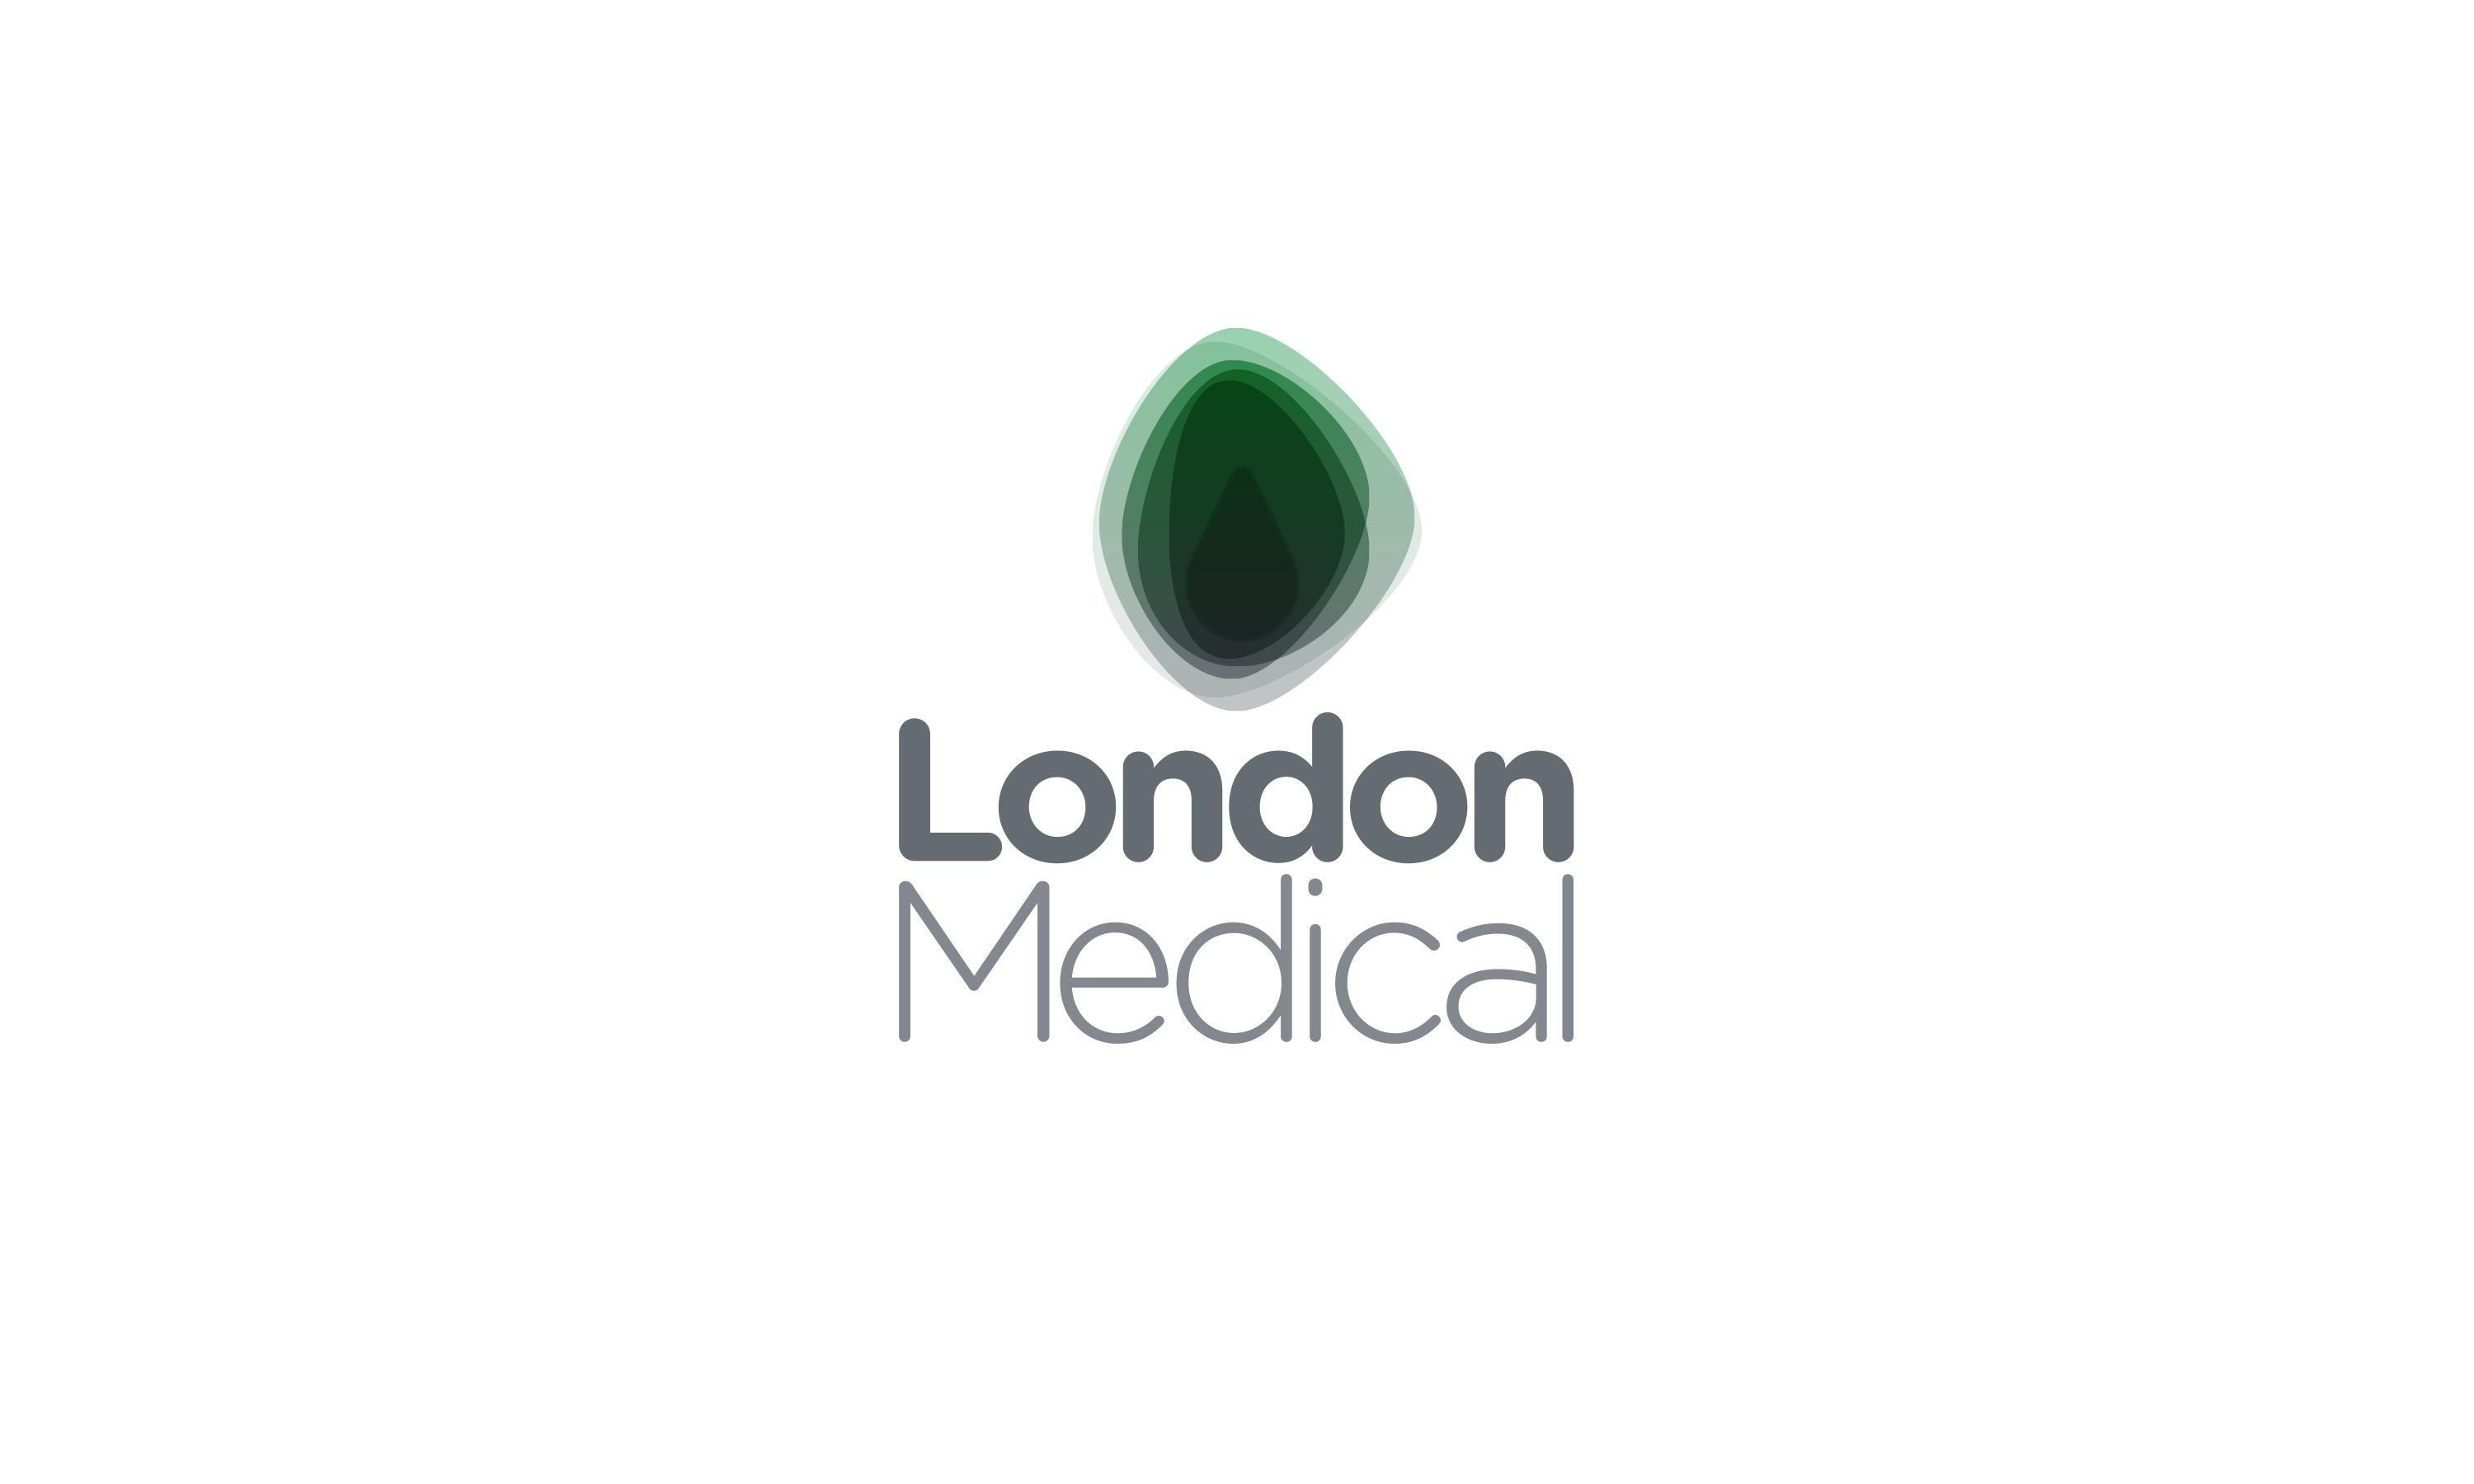 London Medical commission Neon